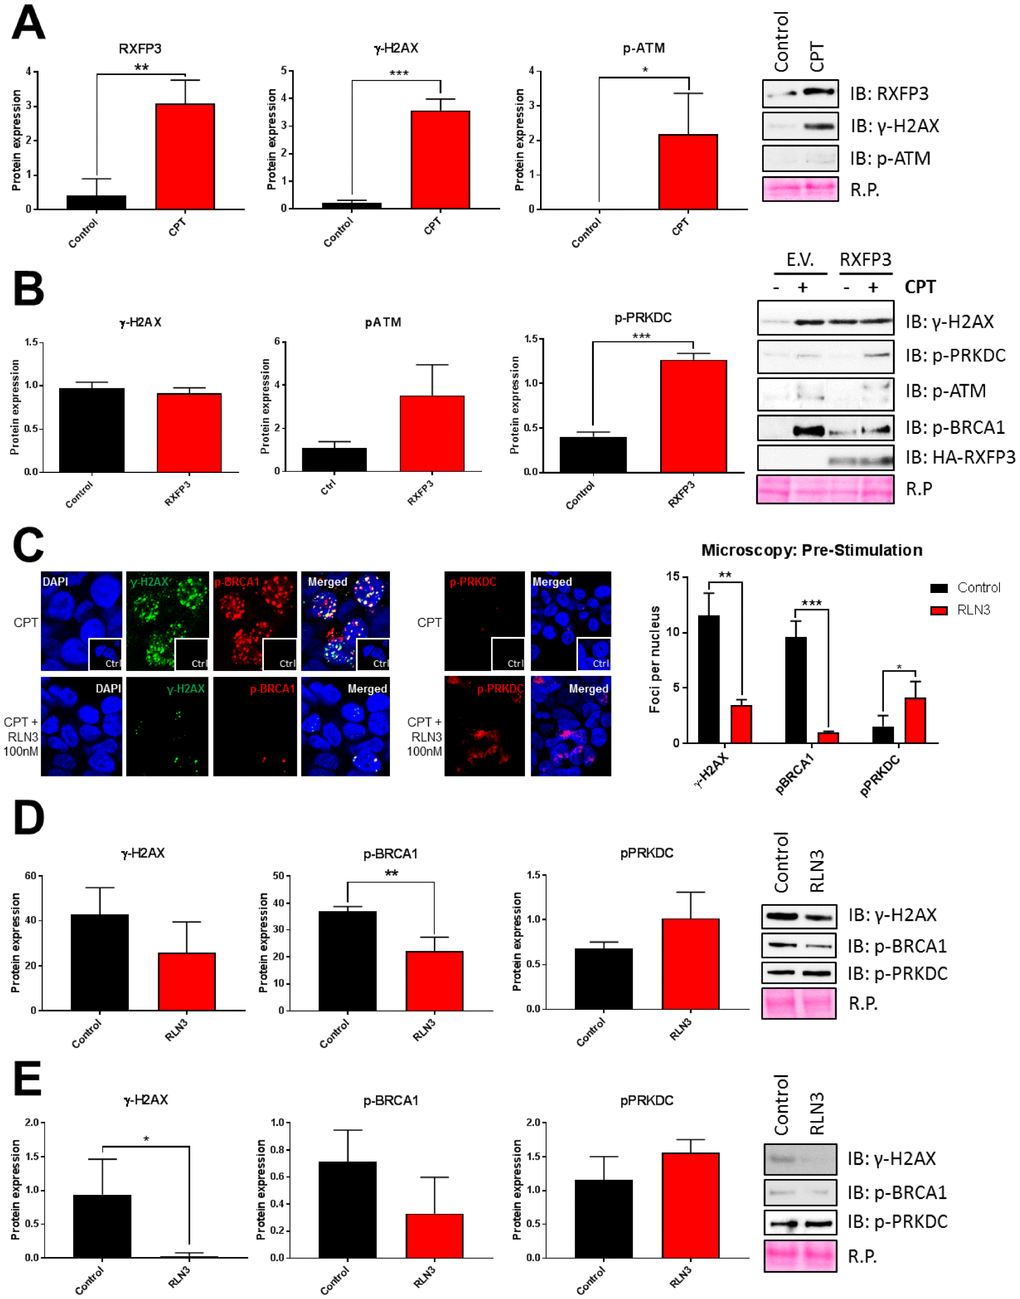 RXFP3 acts as a protective factor of DNA damage. (A) RXFP3 expression increases significantly with DNA damage caused by 10 μM CPT for 24 hours (n=3). Induction of DNA damage was validated using γ-H2AX and p-ATM. (B) Overexpression of RXFP3 compared to control (E.V.) elicits a specific response of DNA damage-associated proteins in unstressed stressed (CPT-treated) cells. Overexpression of the RXFP3, in the absence of CPT exposure, appears to prepare the cell for stress responsivity as this results in the activation of BRCA1 (p-BRCA1), PRKDC (p-PRKDC), ATM (p-ATM) and H2AX (γ-H2AX). However, we also see a decrease in activation compared to control (E.V.) transfected cells after stress of these proteins, indicating that the RXFP3 potentially facilitates DNA damage repair (n=3). (C) RXFP3 stimulation using RLN3 (100 nM, 1 and 2 hours prior to stress induction using 10 μM CPT), directly affects the number of γ-H2AX, pBRCA1 and pPRKDC foci (n=30) using confocal microscopy, where we see a specific decrease in γ-H2AX, and p-BRCA1 foci, and an increase in PRKDC activation. (D) These results were also shown using immunoblotting (n=6). (E) Stimulating RXFP3 after stress induction (2 shots, 1 and 2 hours after 3h 10 μM CPT), here called post-stimulation, induced similar effects (n=6).